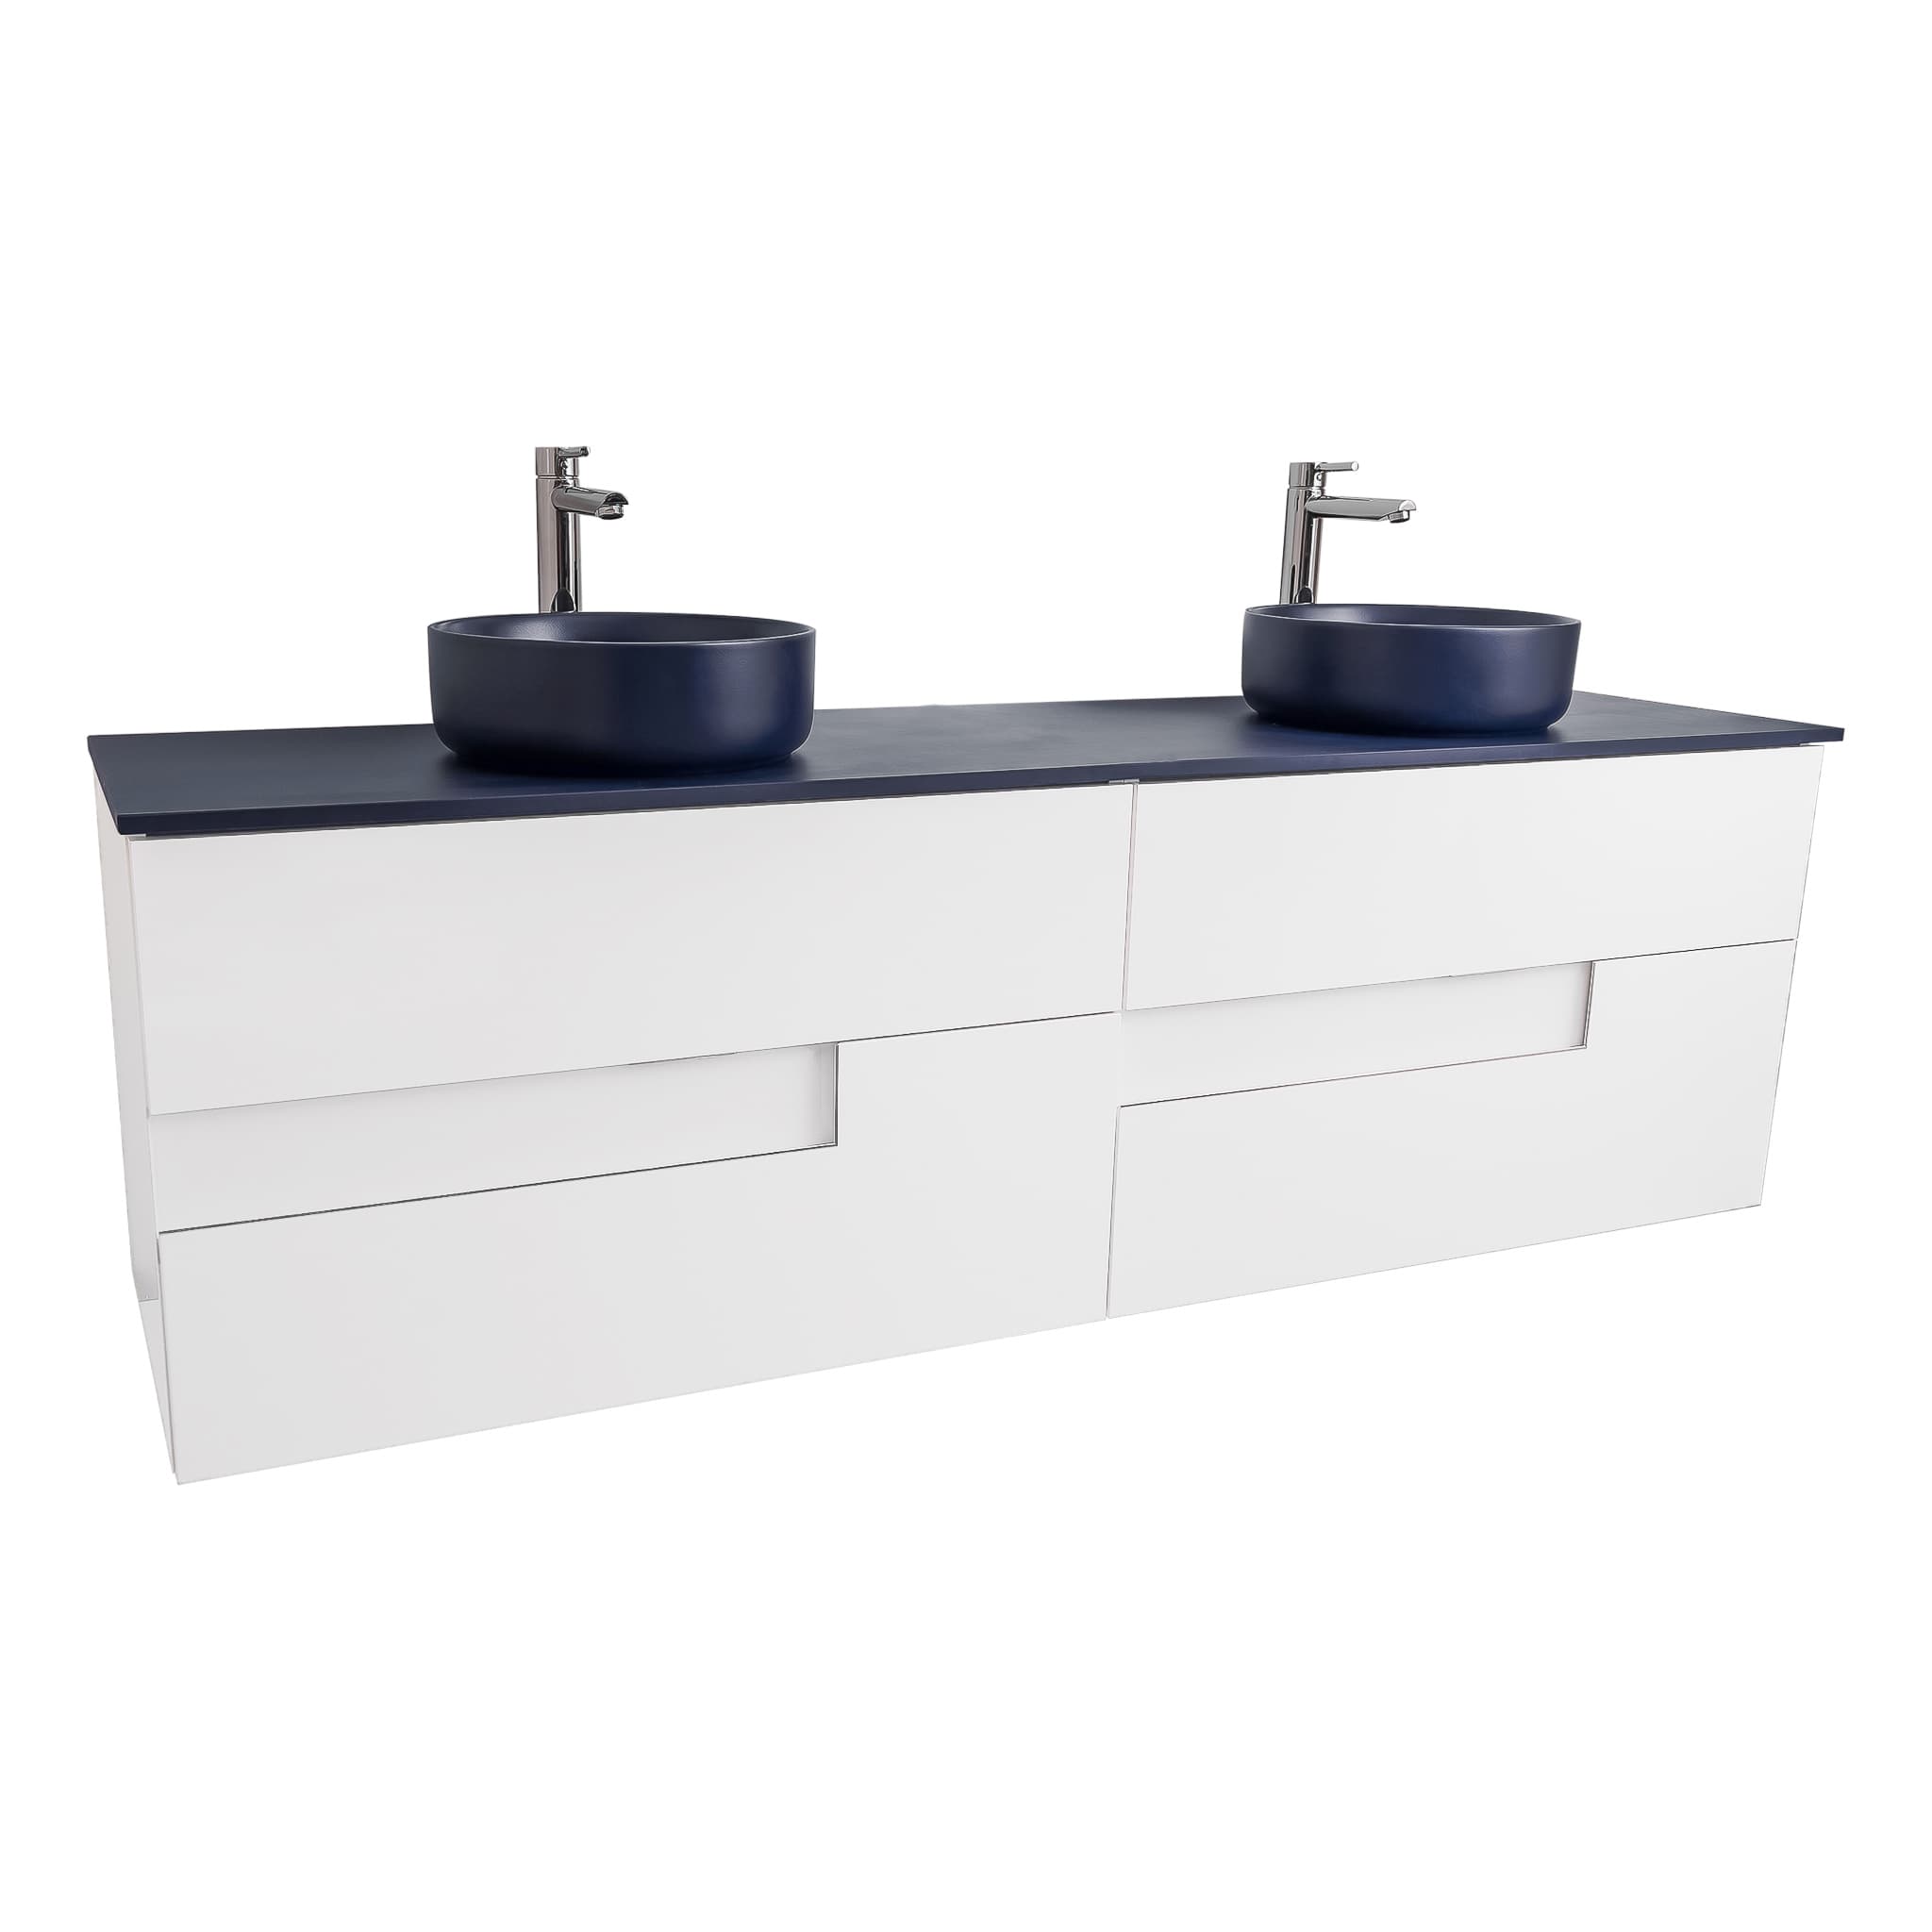 Vision 63 White High Gloss Cabinet, Ares Navy Blue Top And Two Ares Navy Blue Ceramic Basin, Wall Mounted Modern Vanity Set